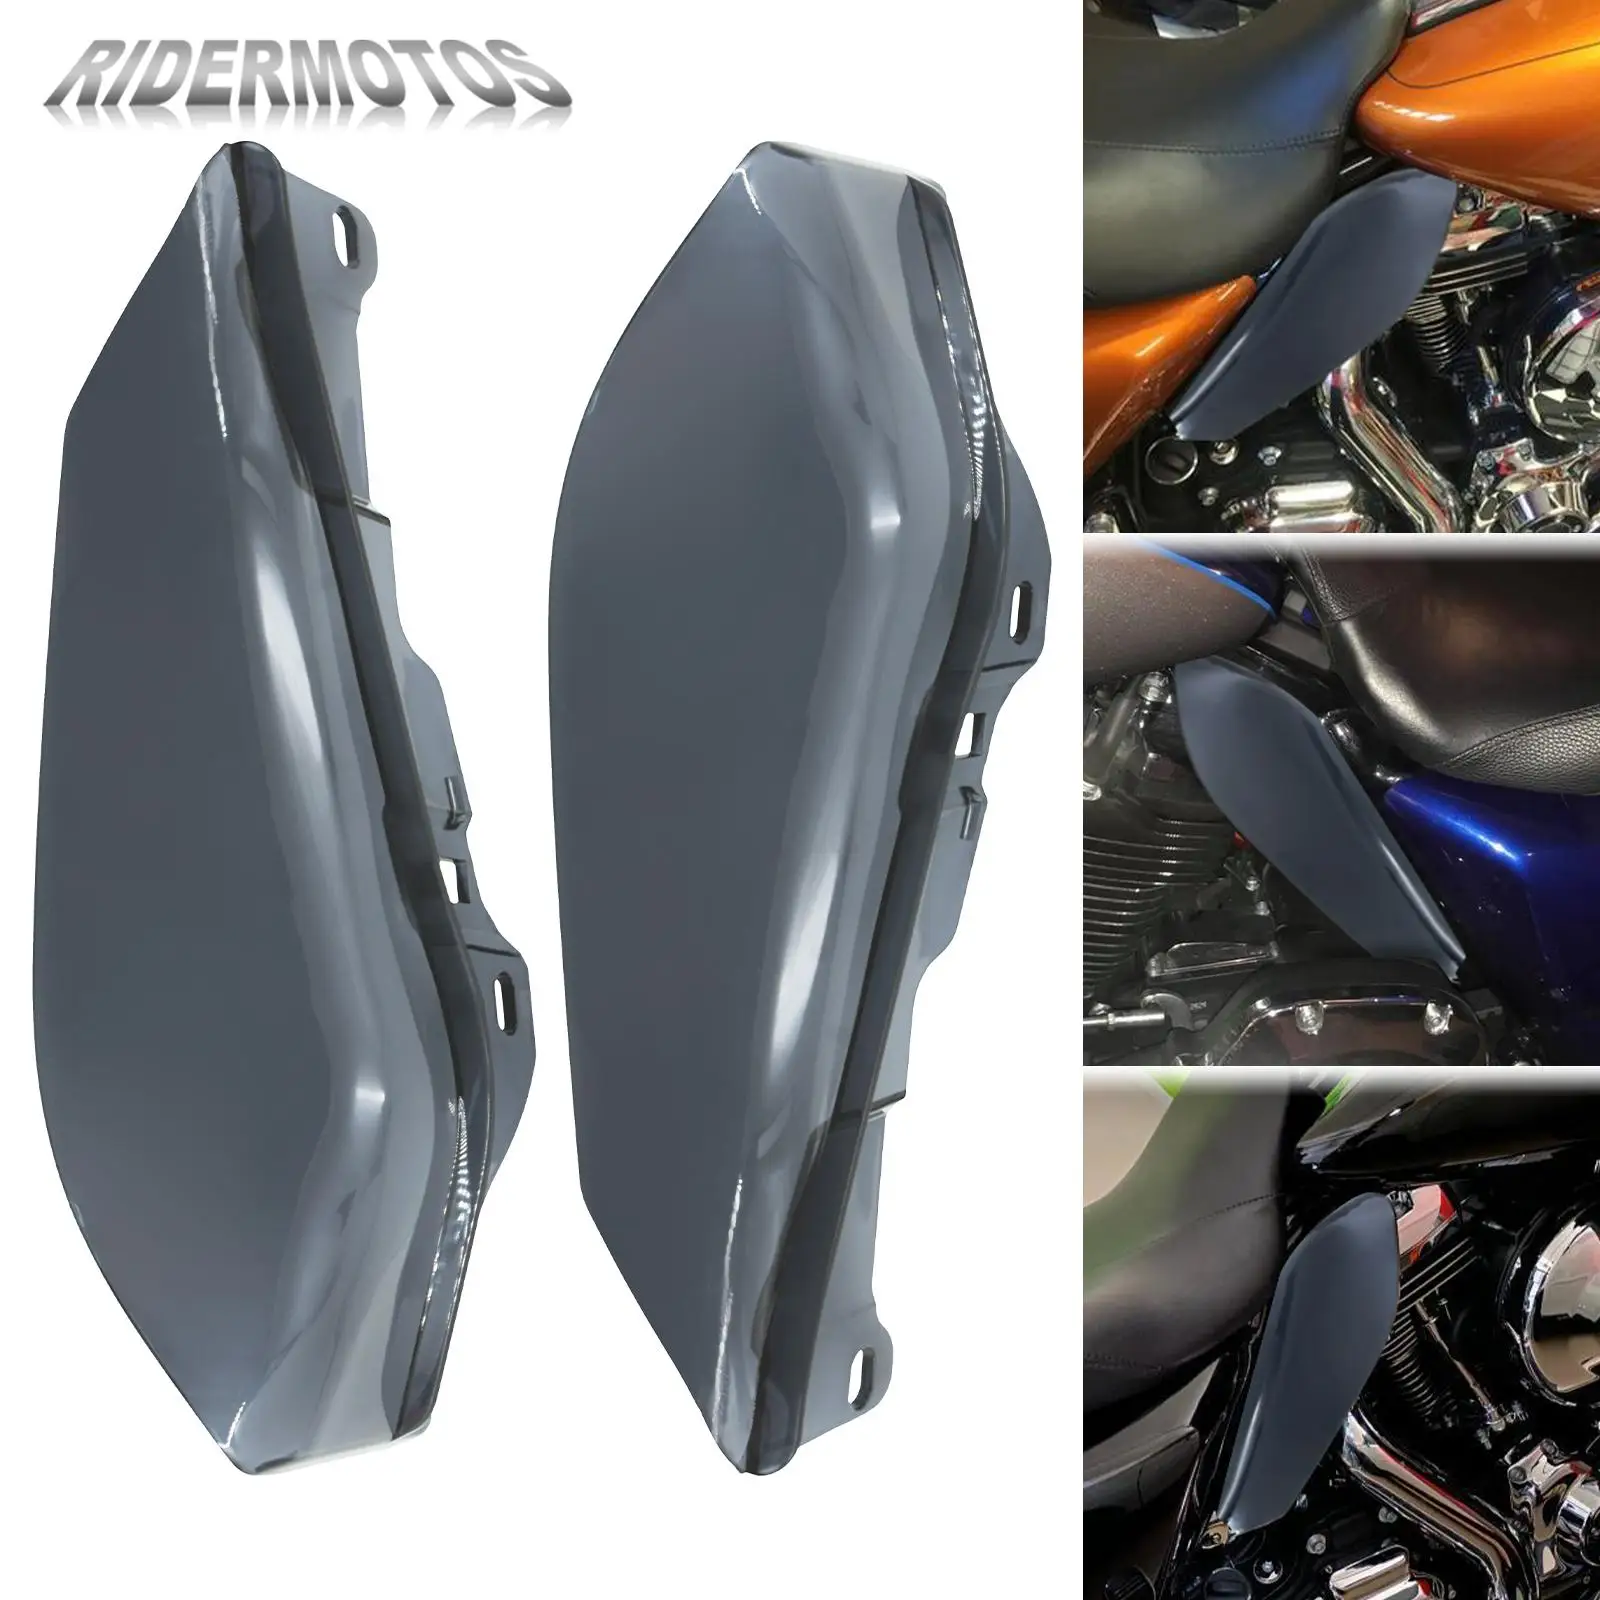 

Motorcycle Mid-Frame Air Deflector Heat Shield Smoke Trim Cover For Harley Touring Electra Street Glide Road King FLHR 2009-2016